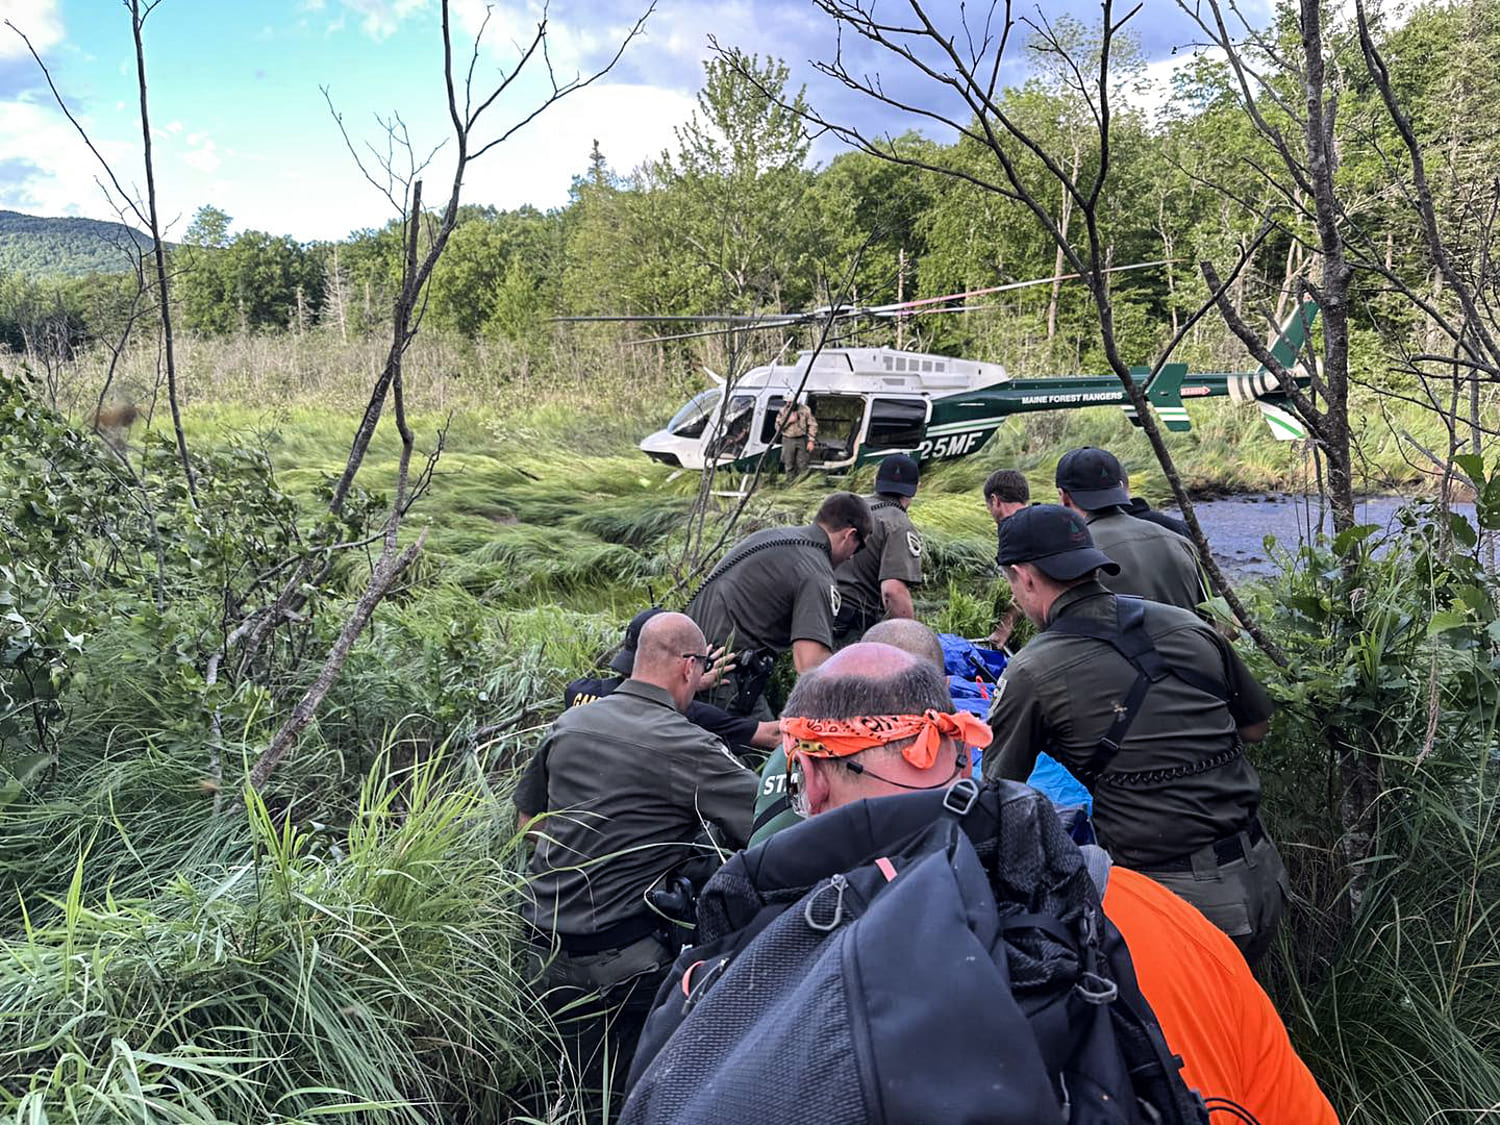 Missing 75-year-old man found alive in Maine bog after 4 days